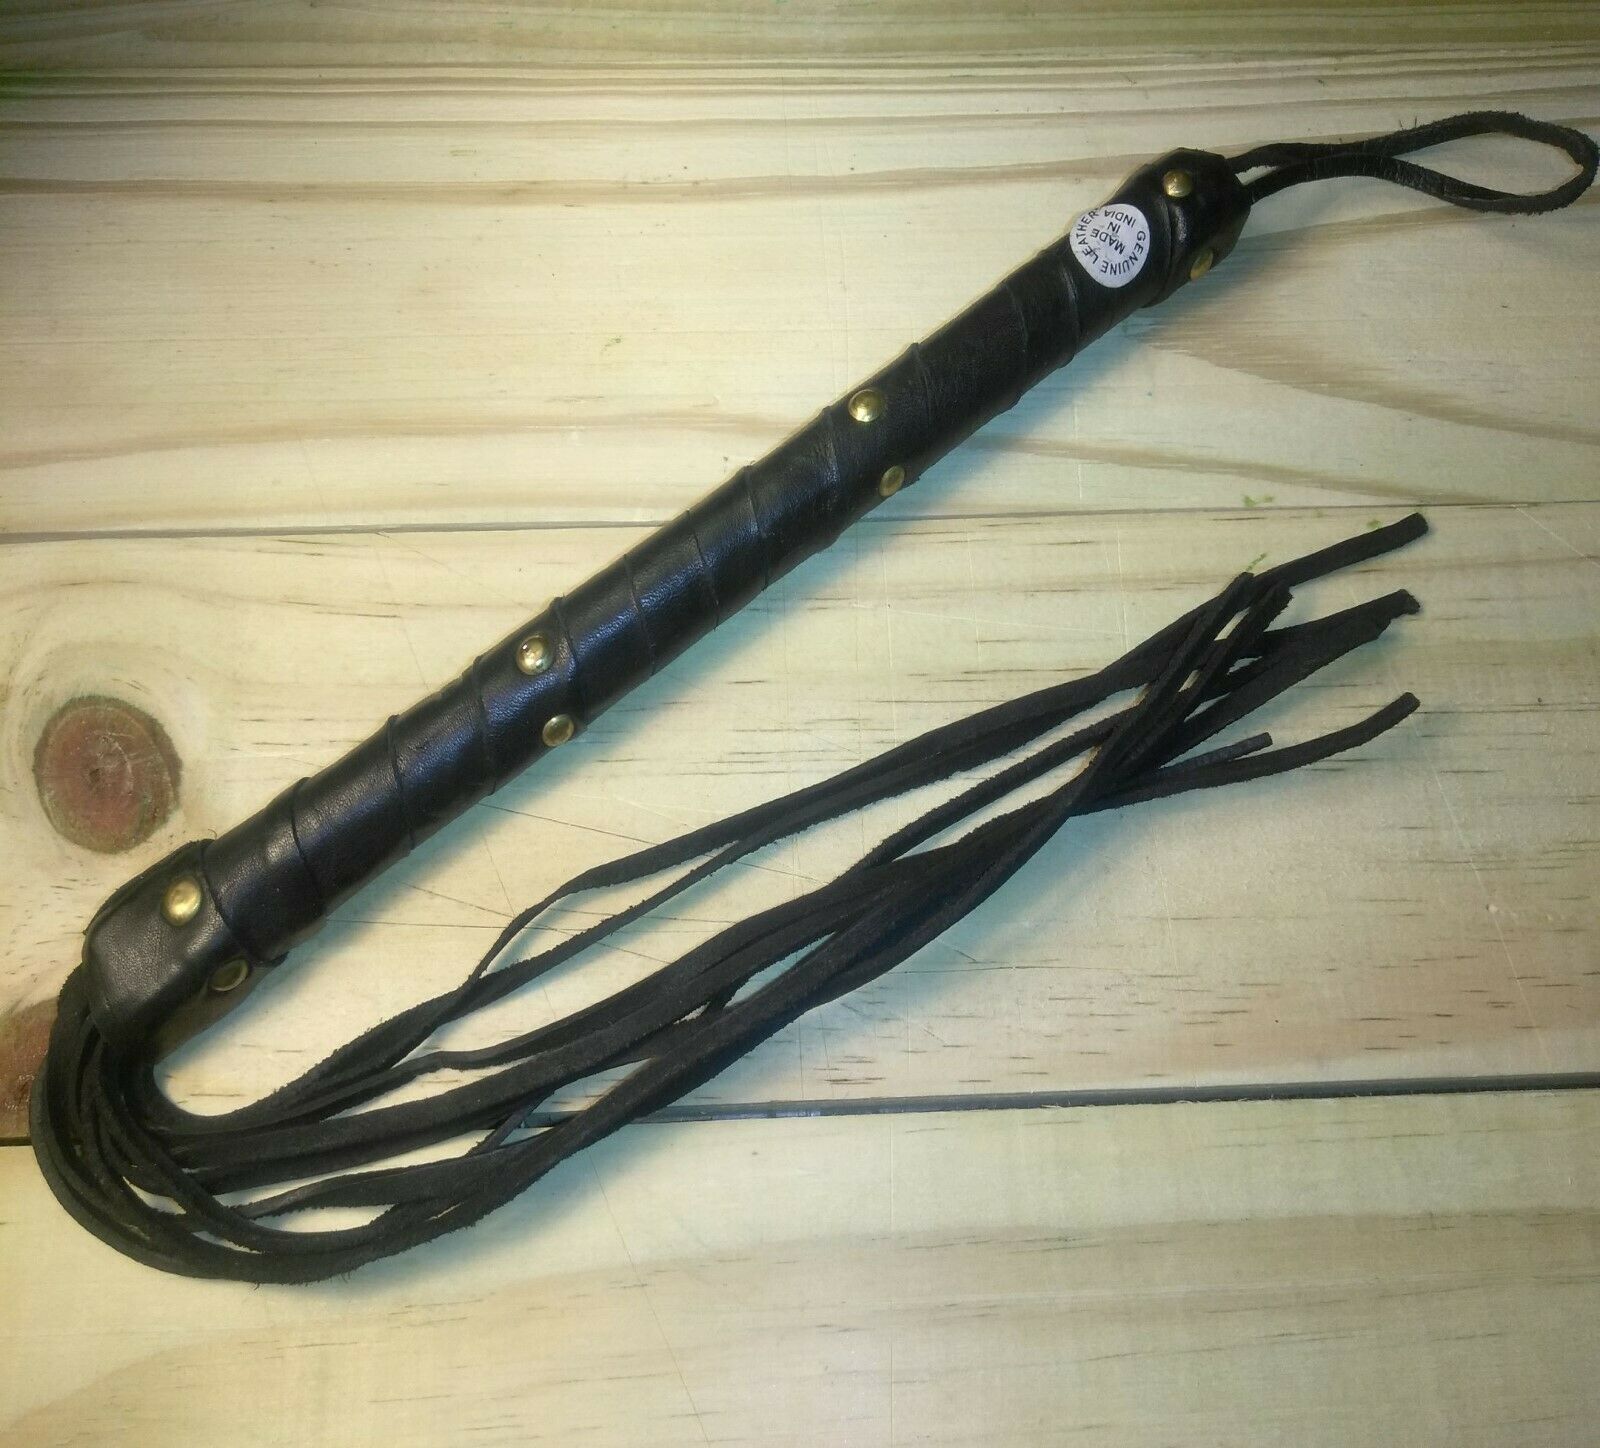 New Riding Crop Genuine Leather Cat Whips, Black Leather Crop Studded Leather